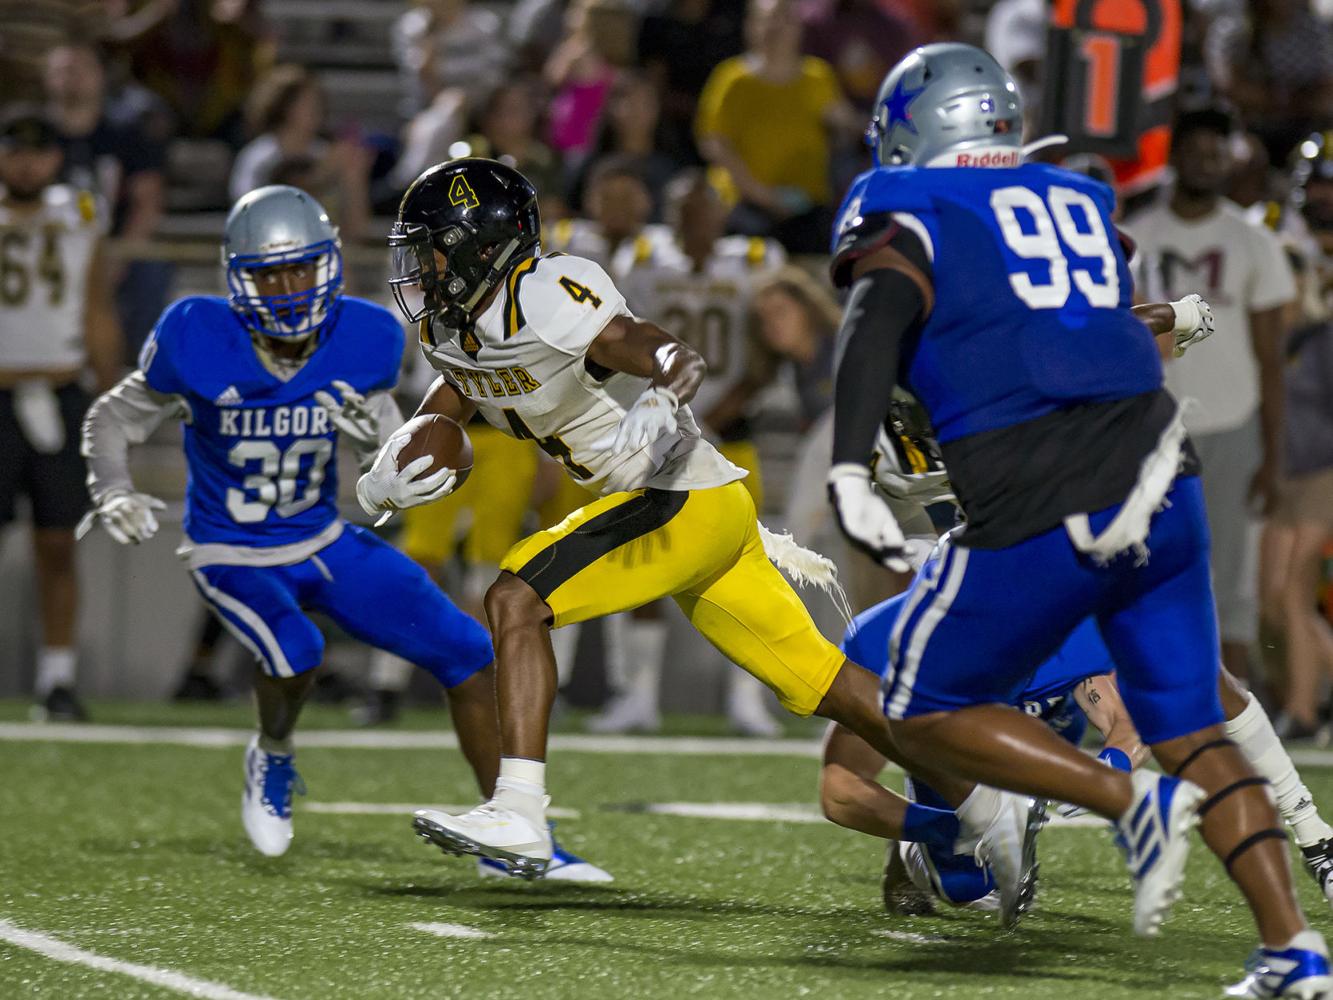 TJC Football: Home at last, Apaches play at CTMF Rose Stadium Saturday | College | tylerpaper.com